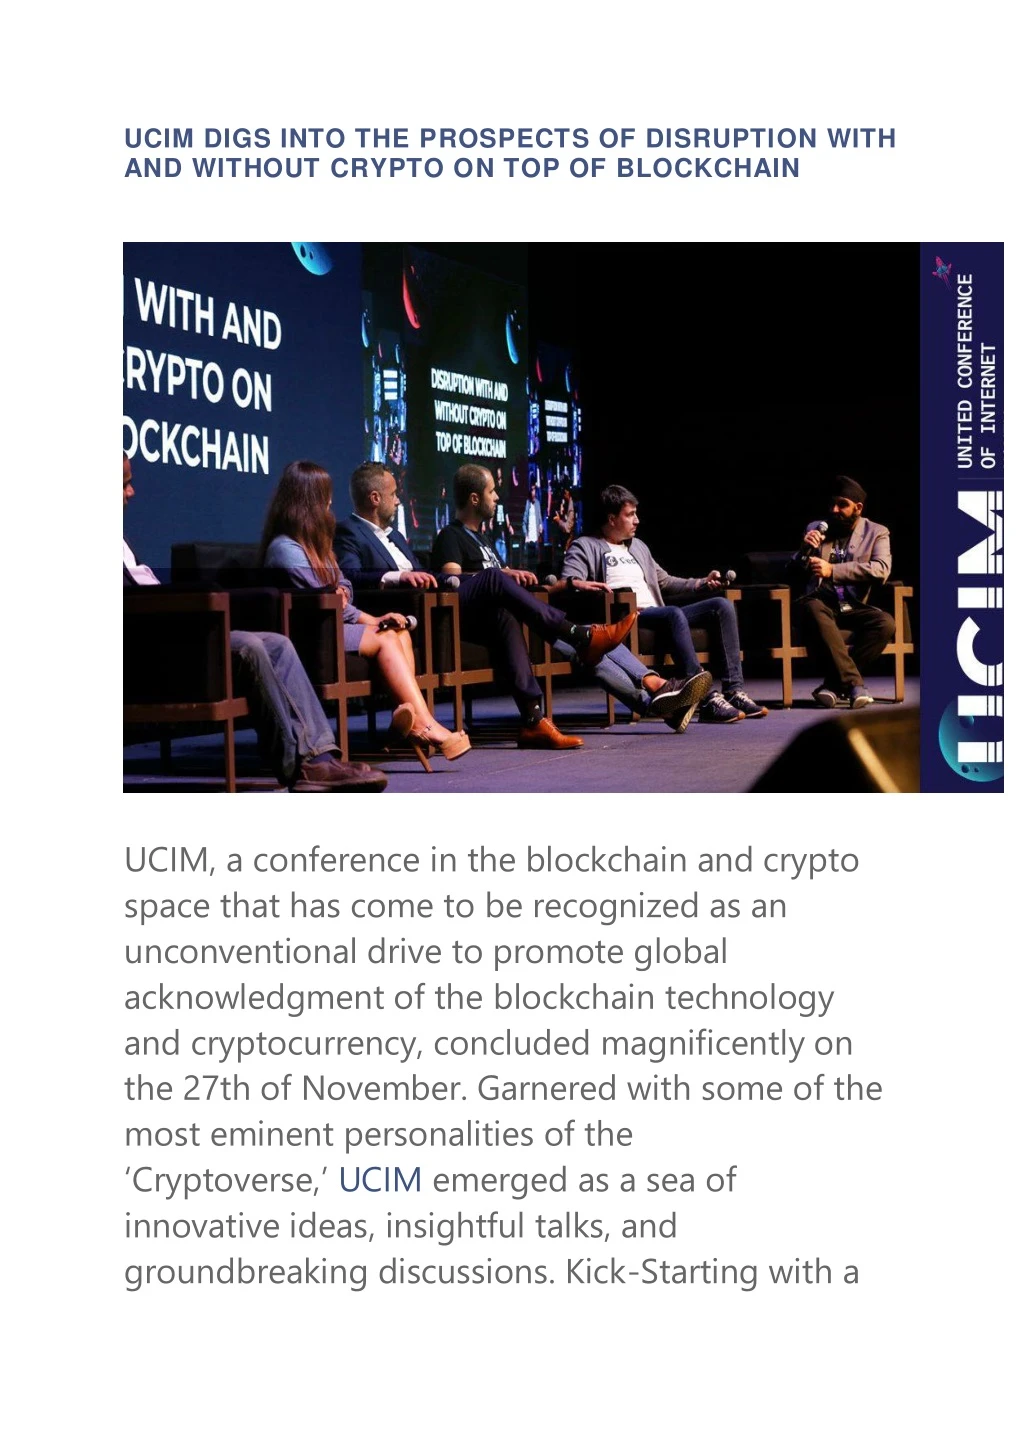 ucim digs into the prospects of disruption with